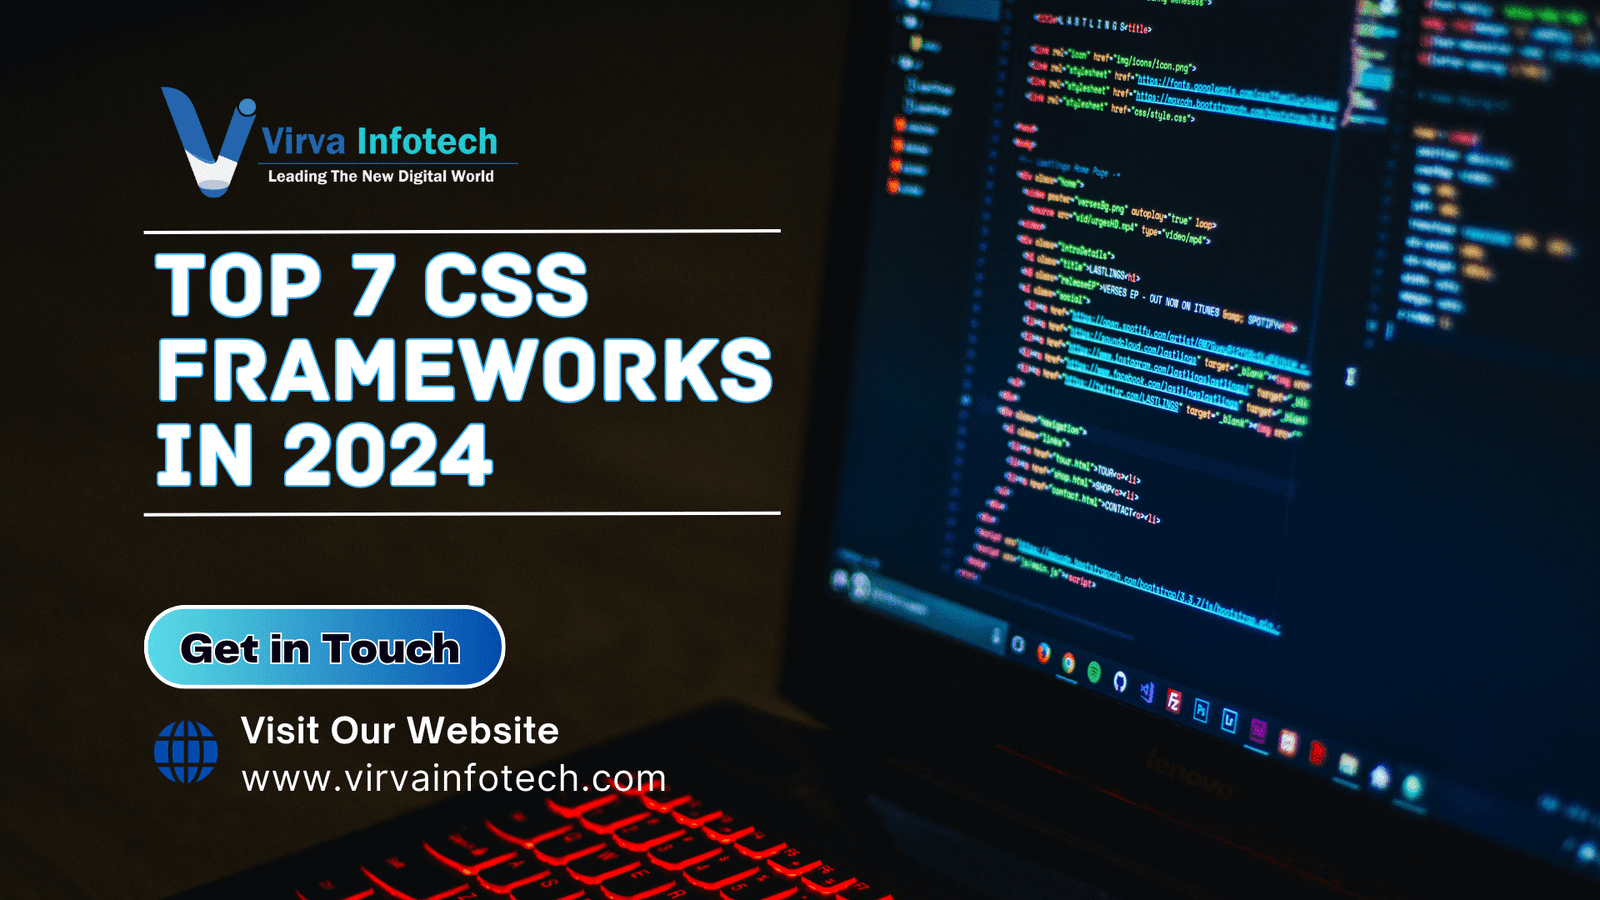 Top 7 CSS Frameworks For Your Web Development in 2024